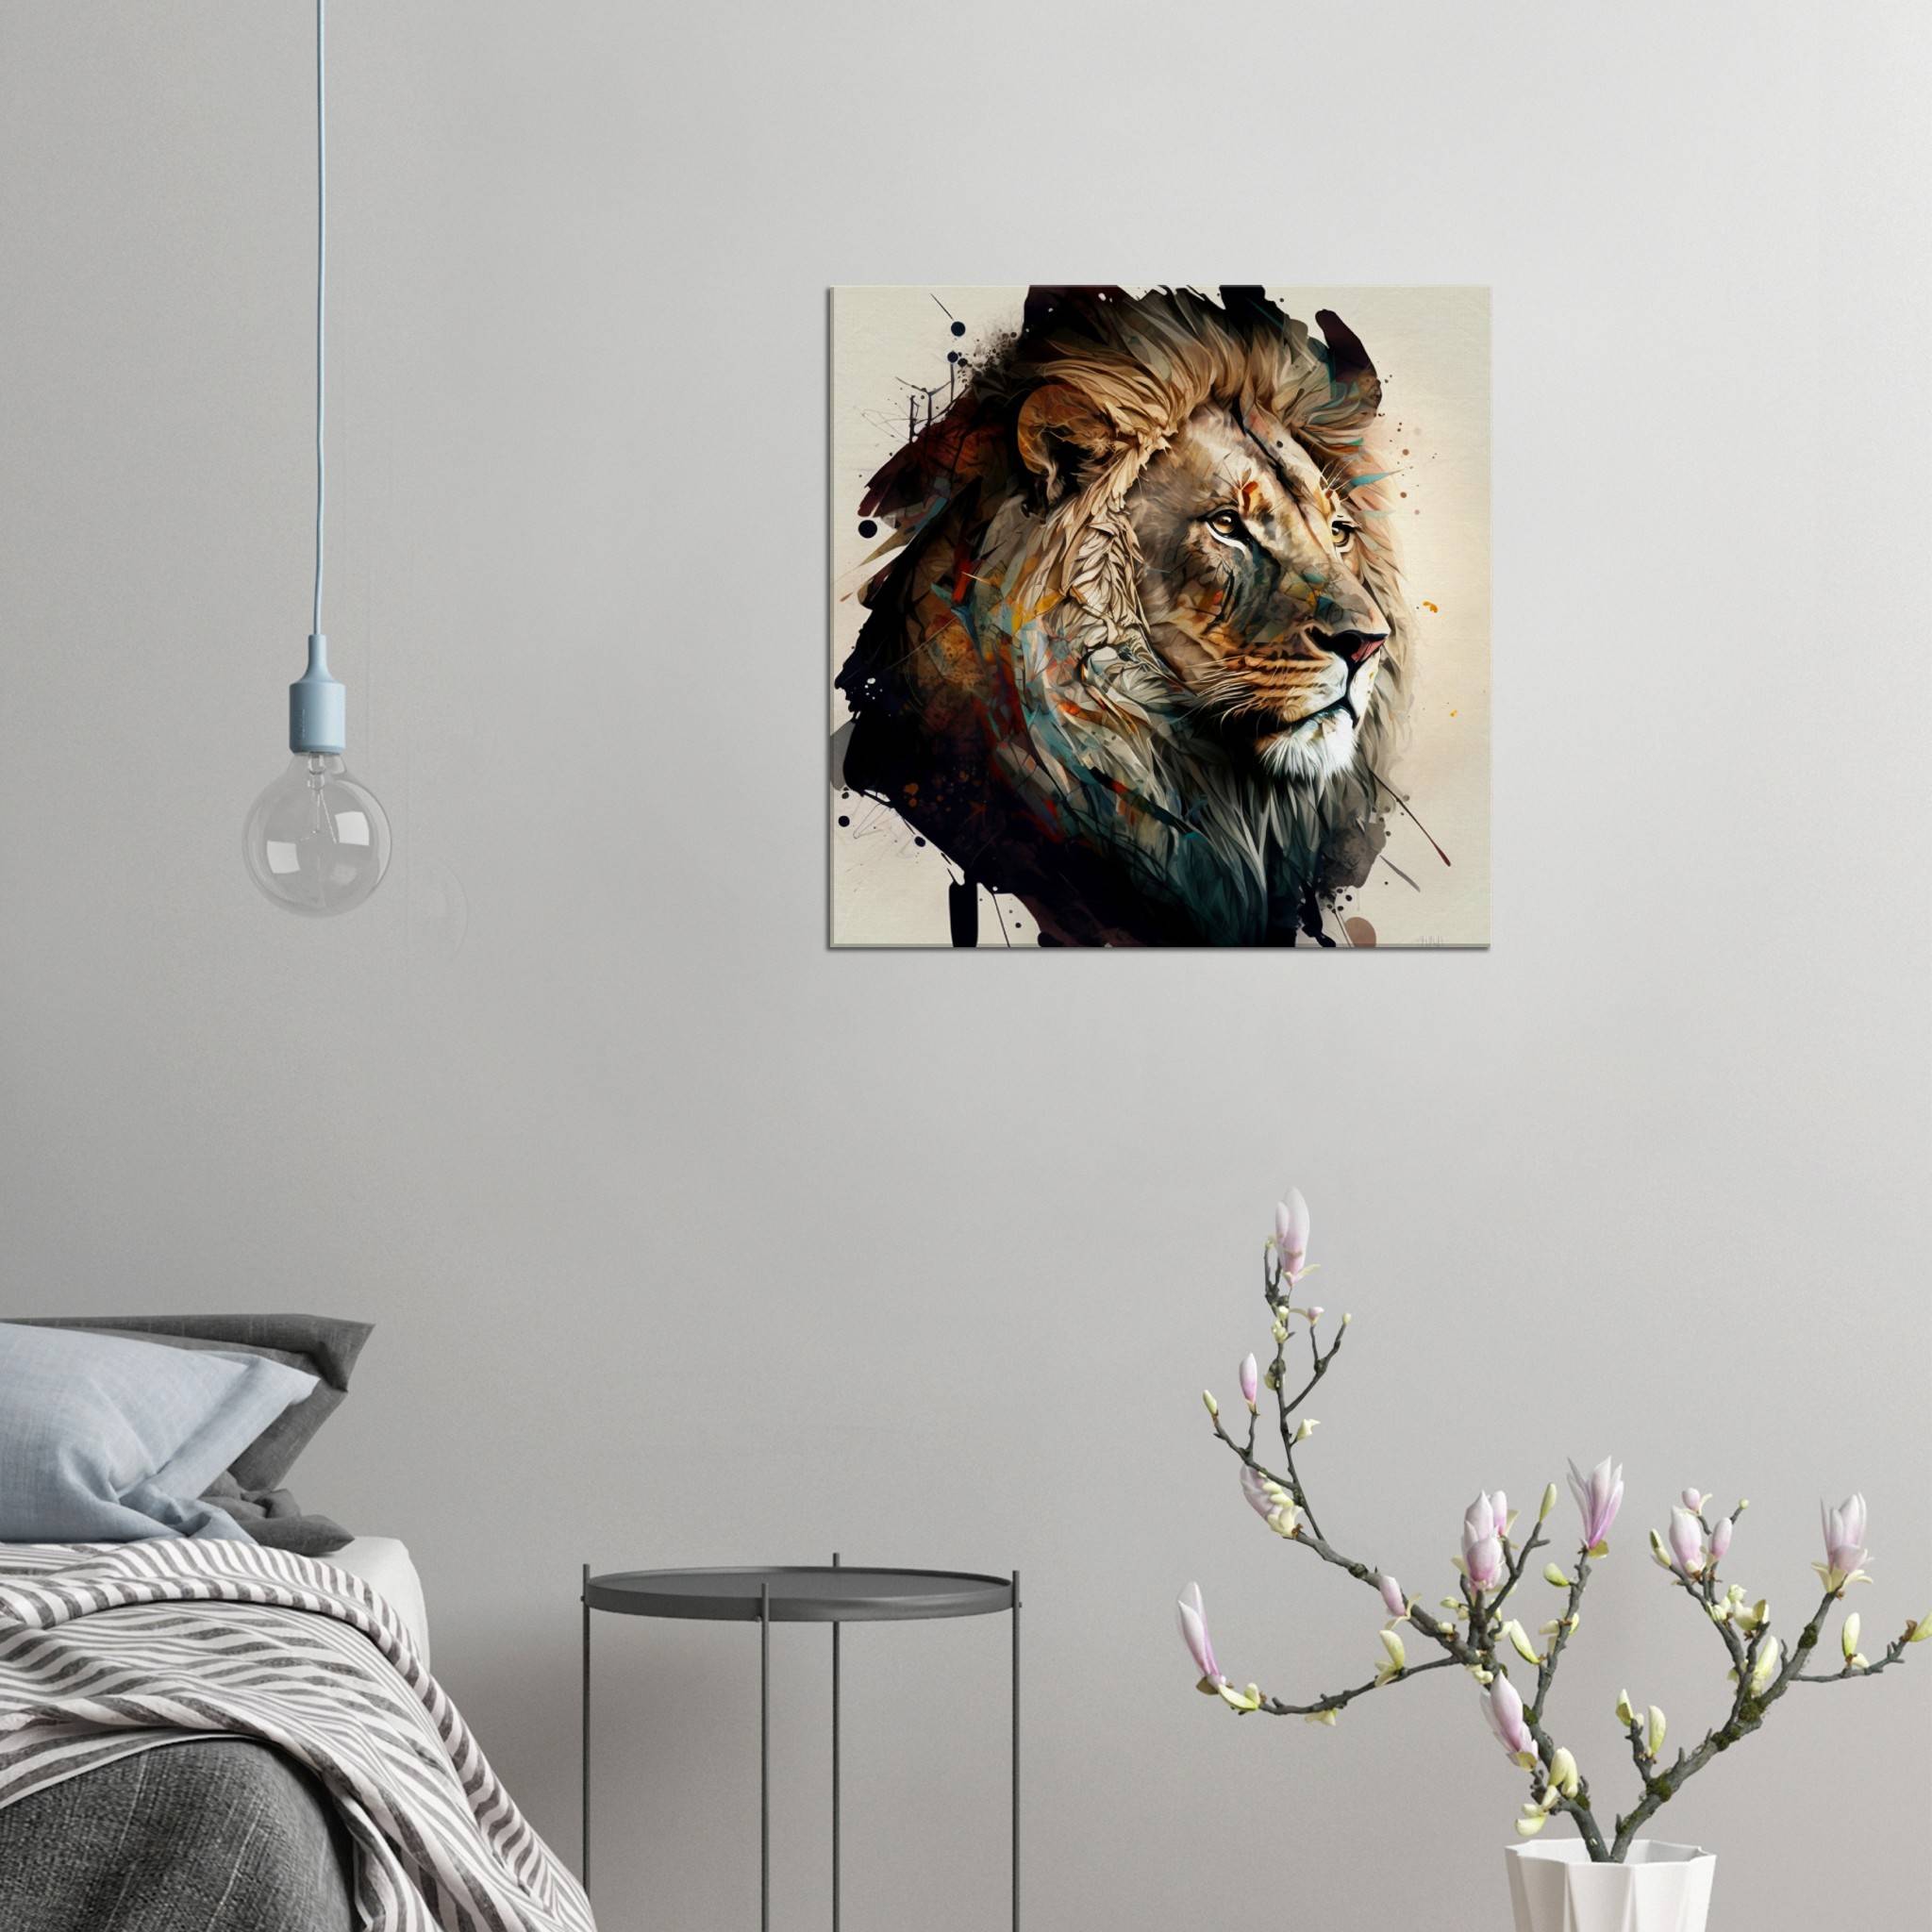 Lion Close to Reality 2 / 60 x 60 cm (Canvas Print) Canvas Print Canvas reproduction The Pianist Print On Demand Fabled Gallery https://fabledgallery.art/product/lion-close-to-reality-2-60-x-60-cm-canvas-print/